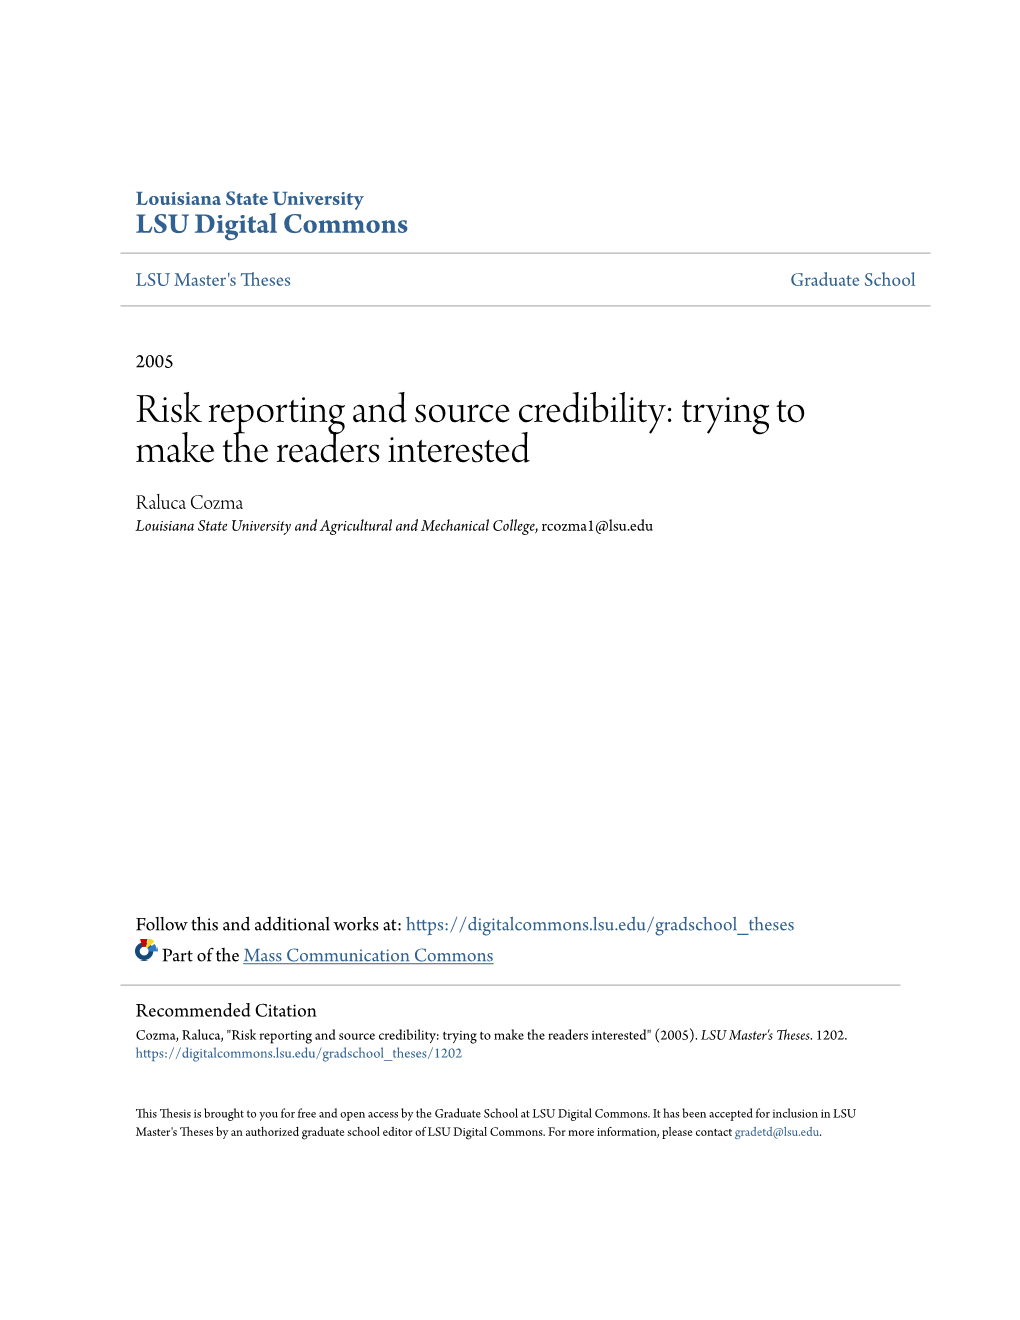 Risk Reporting and Source Credibility: Trying to Make the Readers Interested